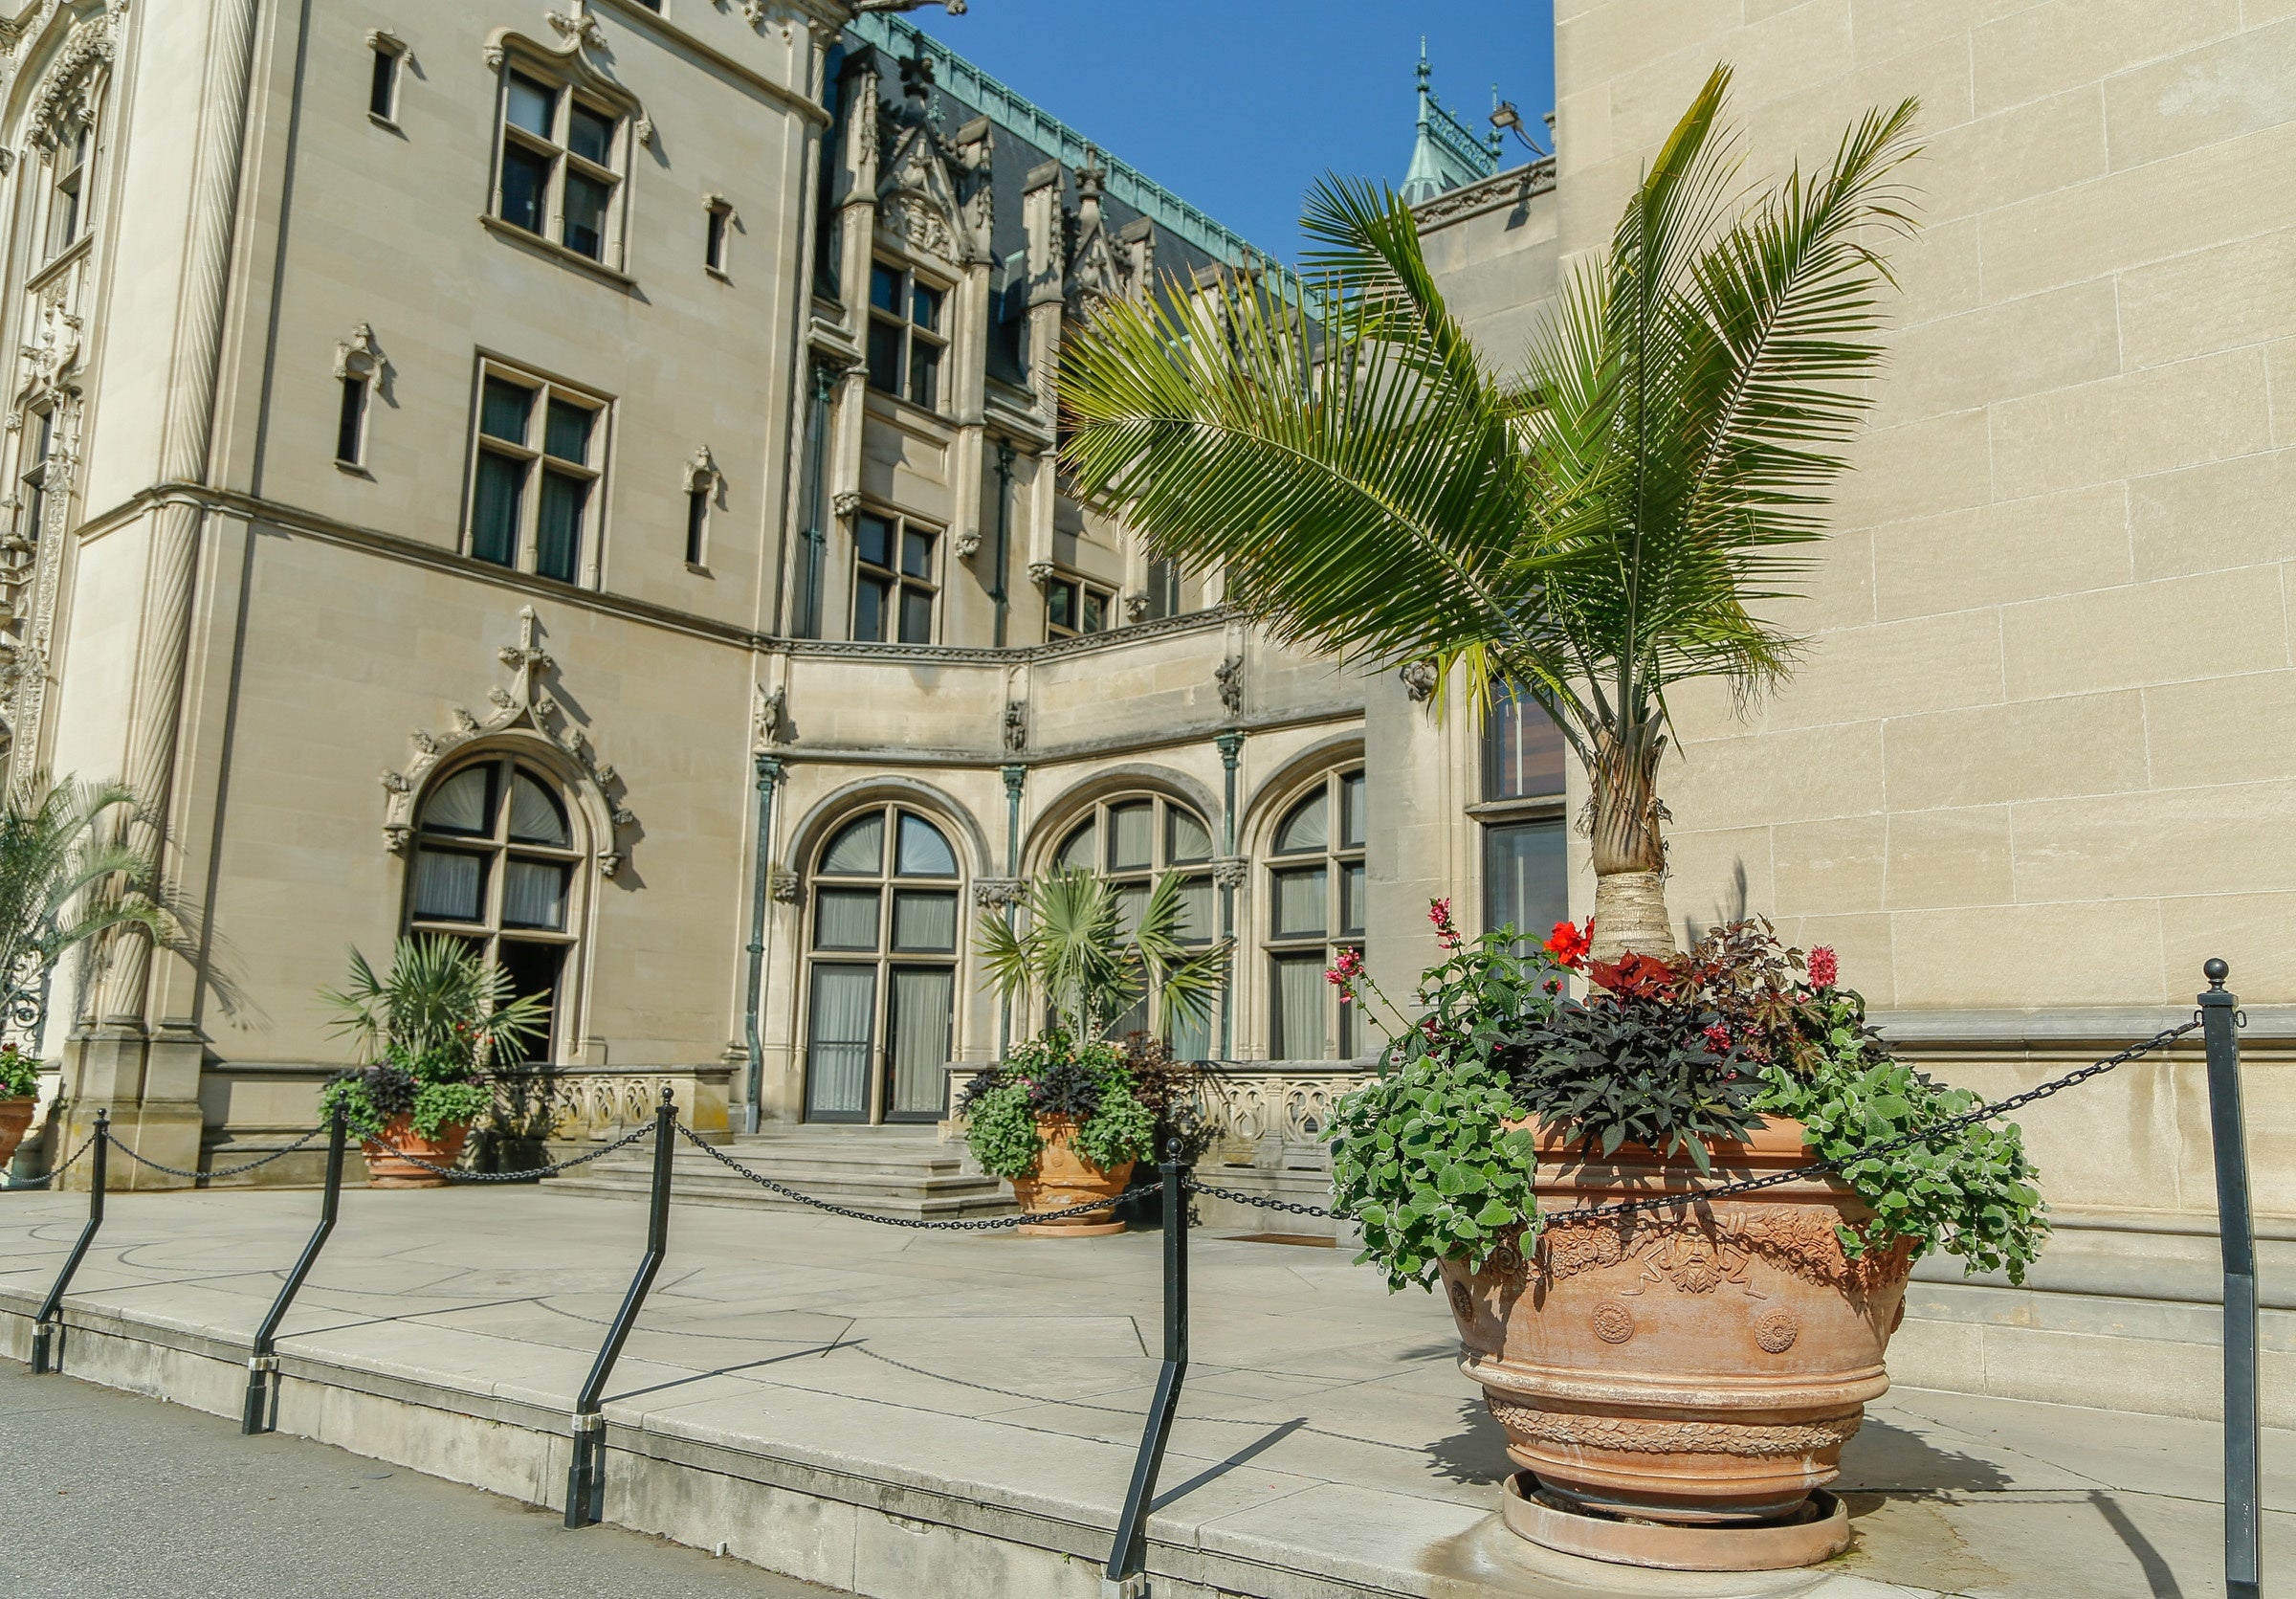 Photo of the side of front of Biltmore House with large potted plants.